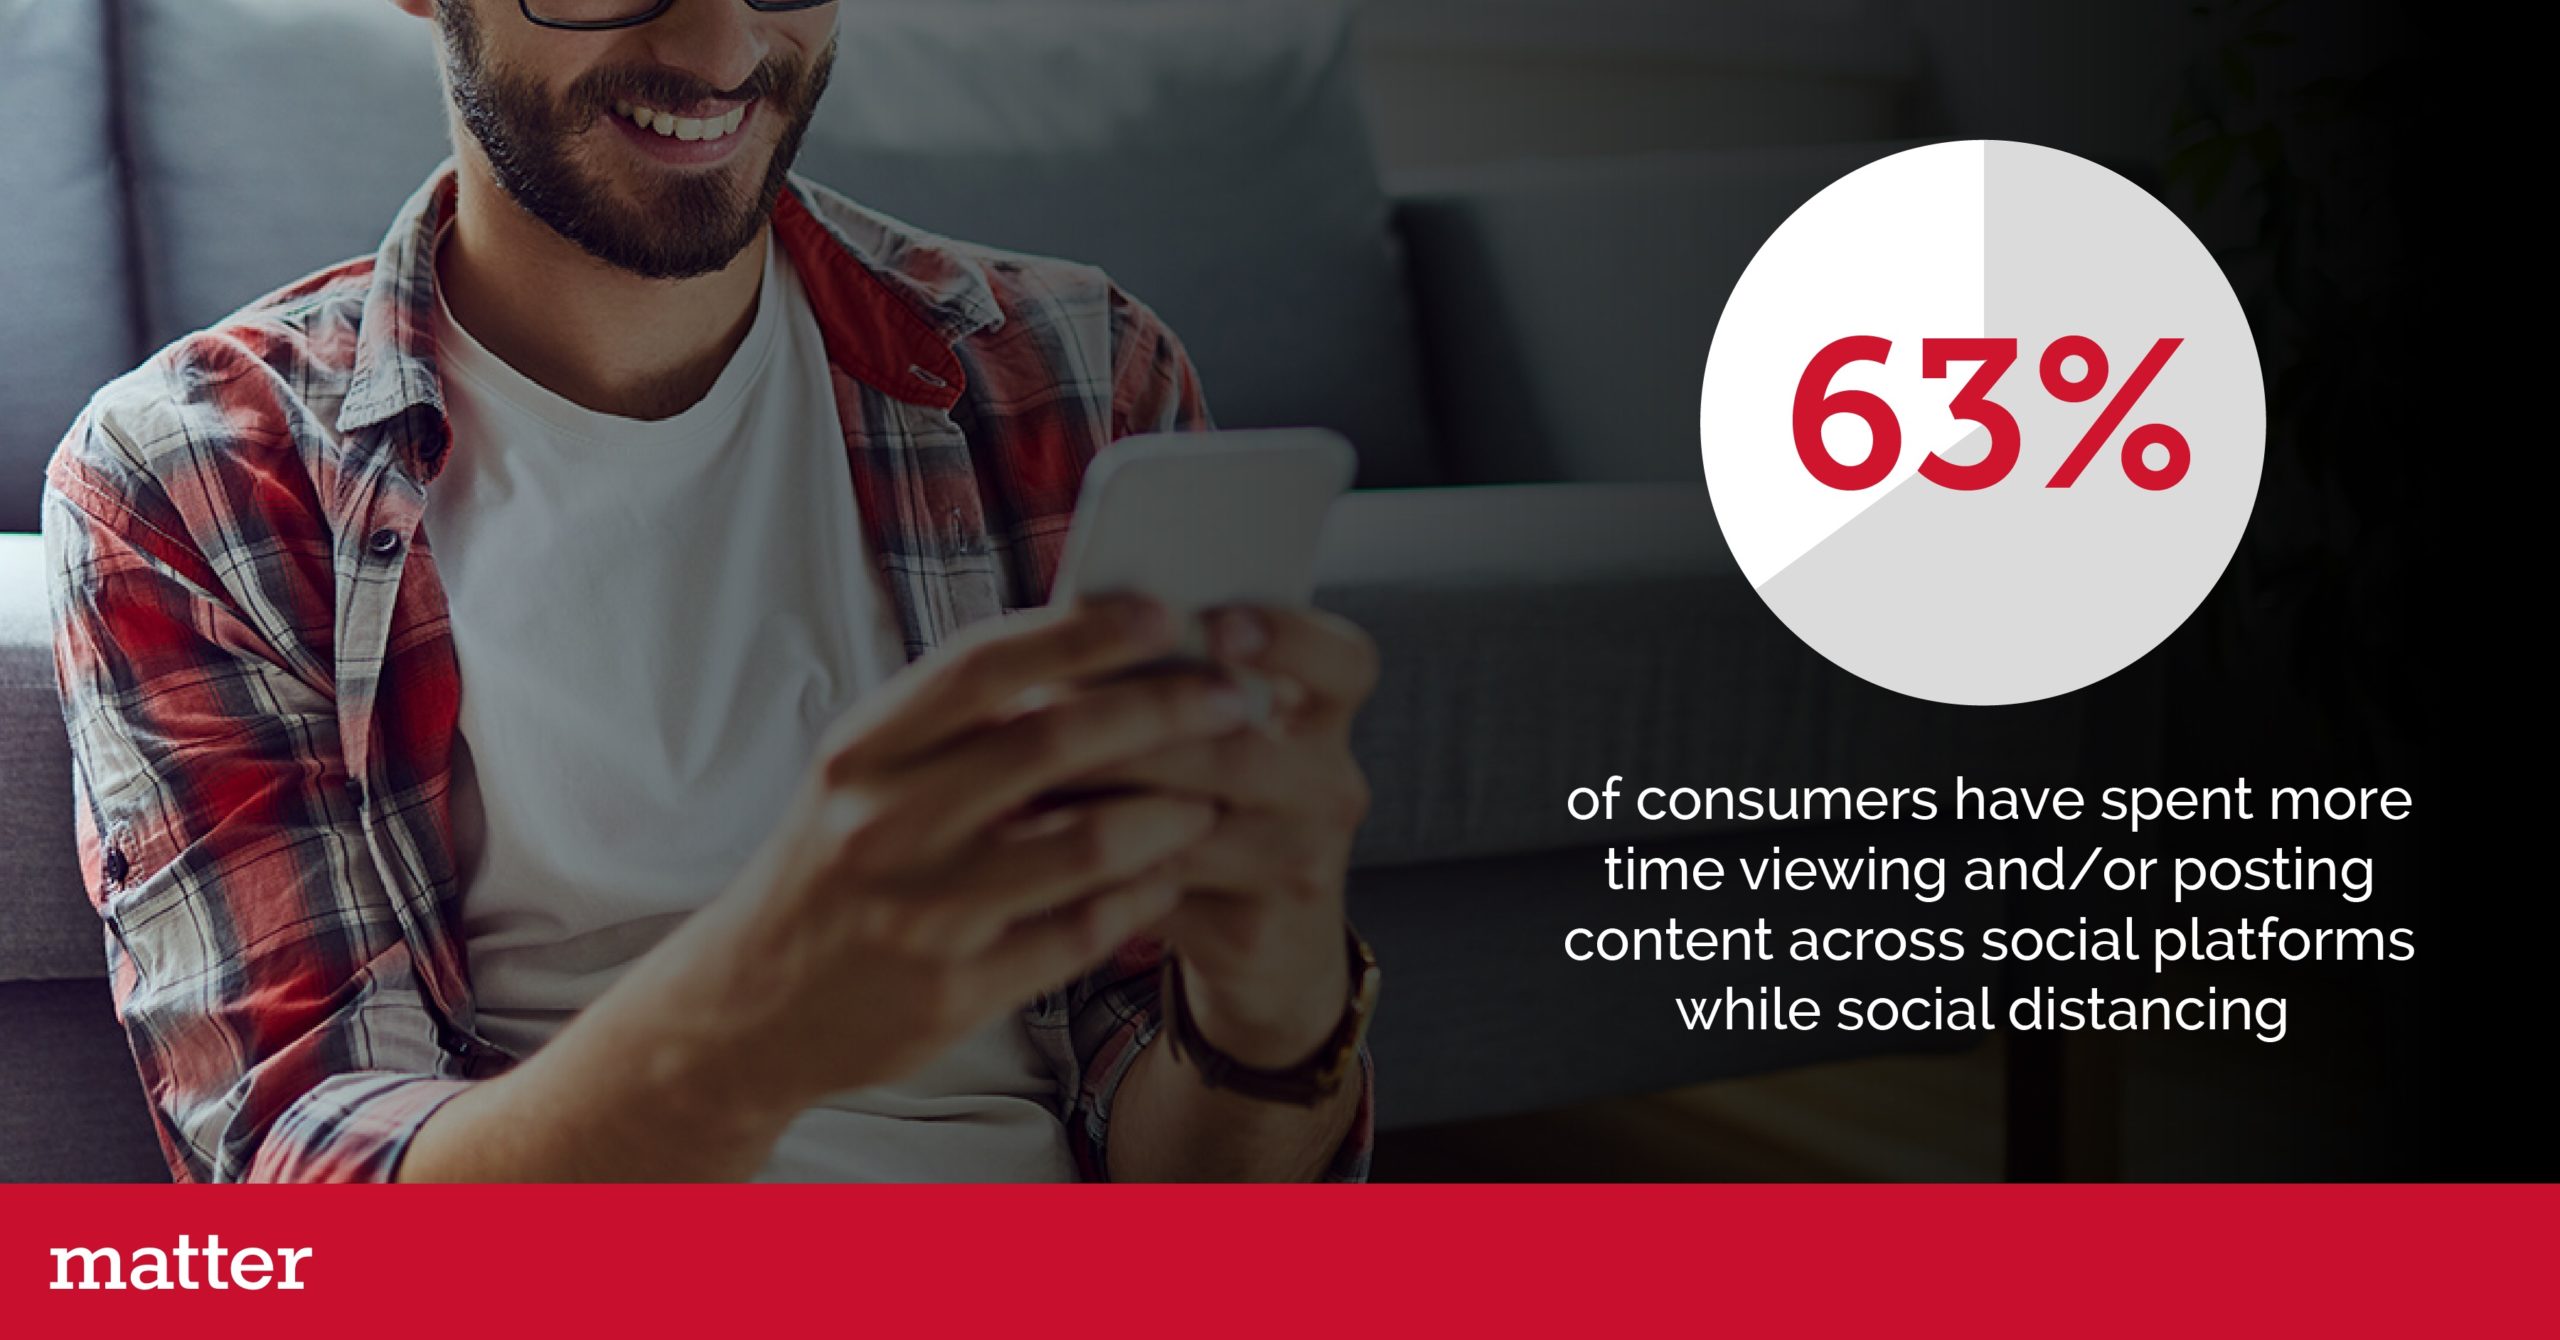 Consumers are finding influencers more helpful and trustworthy than brands during COVID